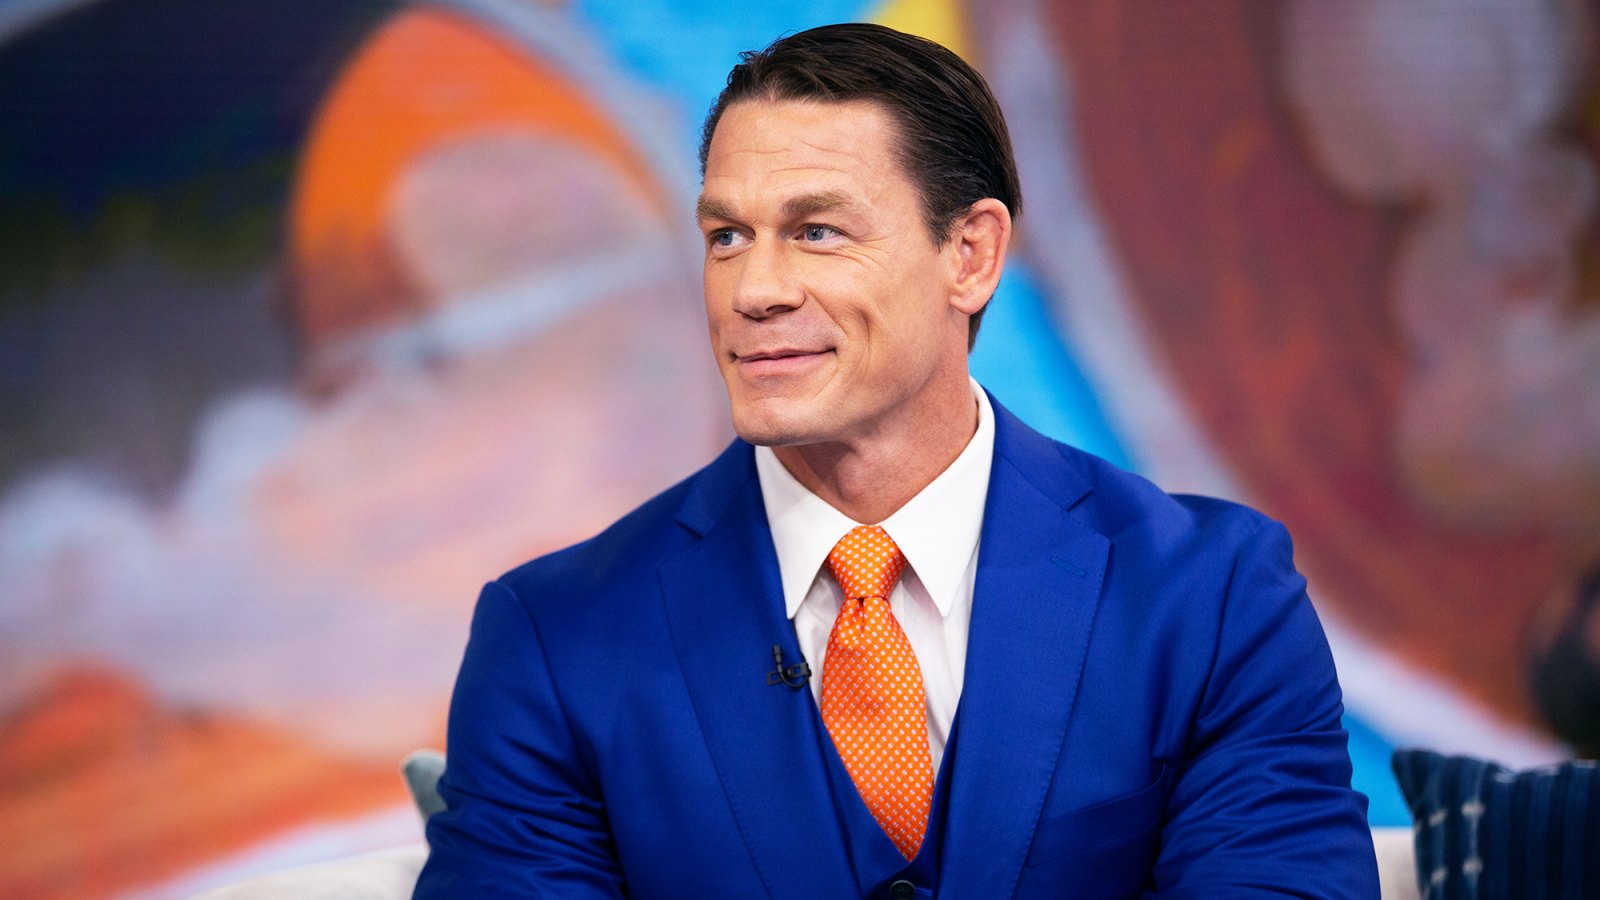 John Cena's New Haircut Has Fans Confused